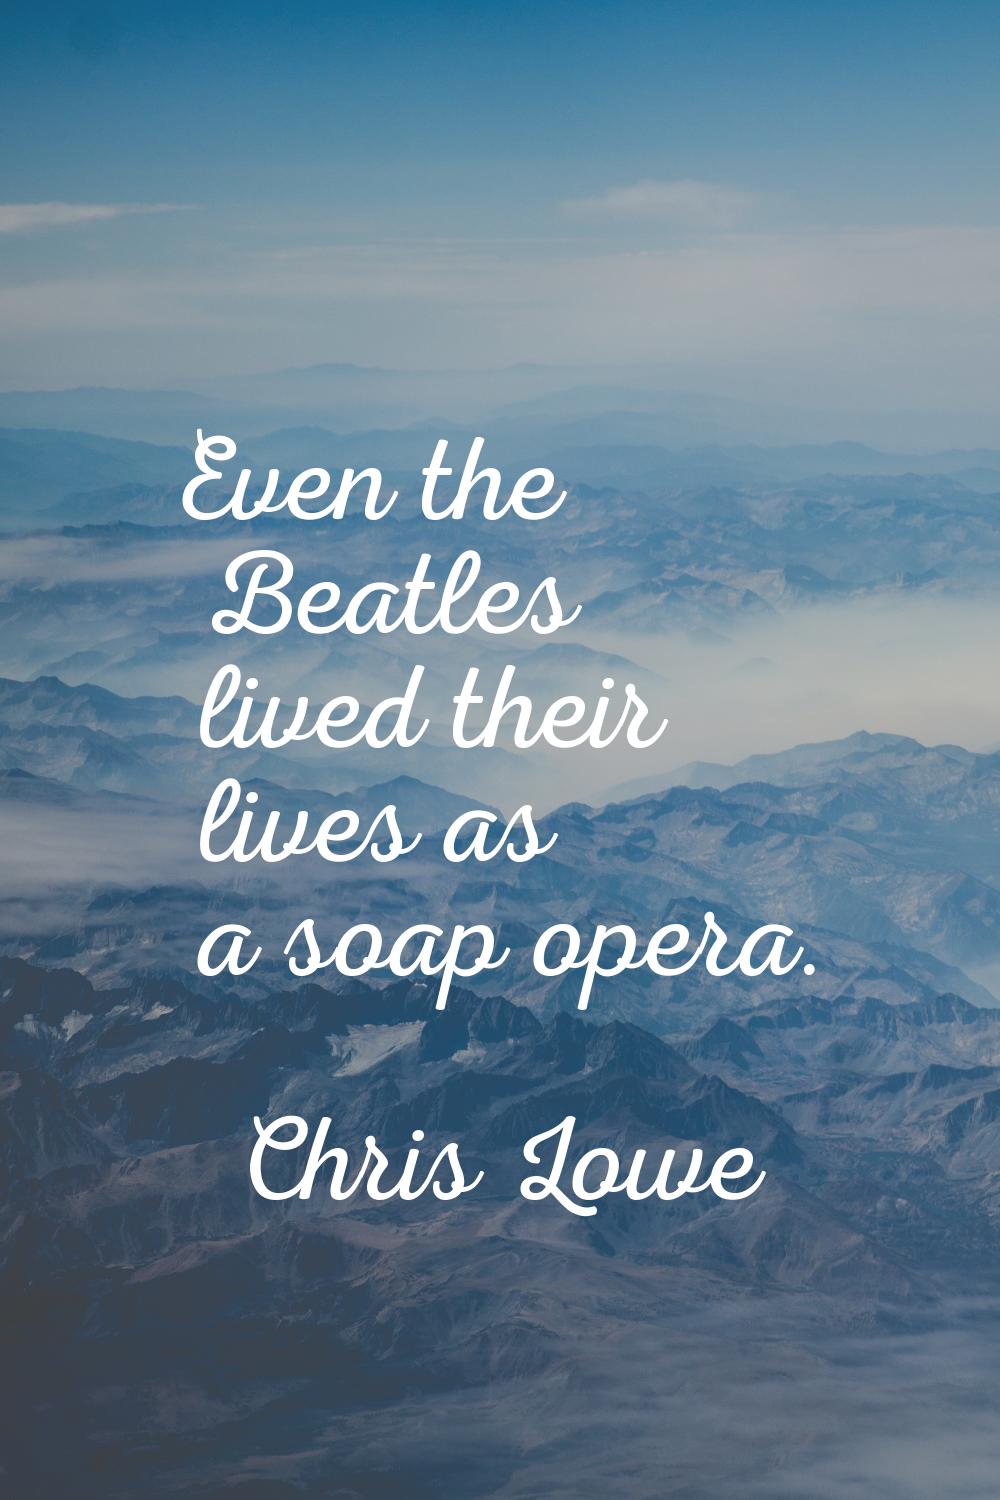 Even the Beatles lived their lives as a soap opera.